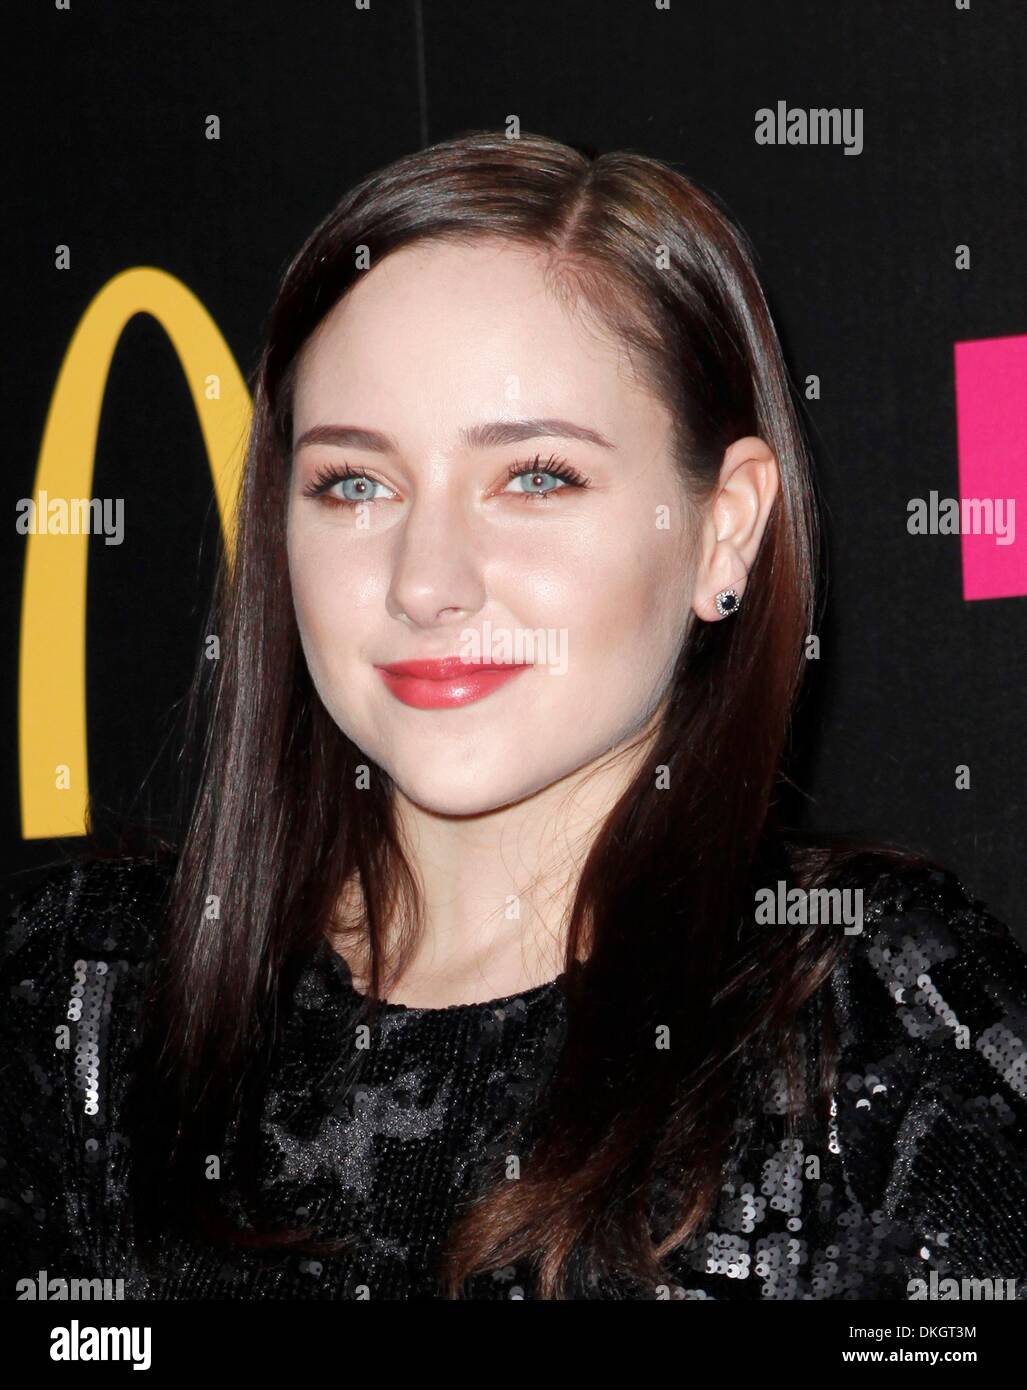 Los Angeles, CA, USA. 5th Dec, 2013. Haley Ramm at arrivals for NYLON Magazine December Issue Celebration, Smashbox Studios West Hollywood, Los Angeles, CA December 5, 2013. Credit:  Emiley Schweich/Everett Collection/Alamy Live News Stock Photo